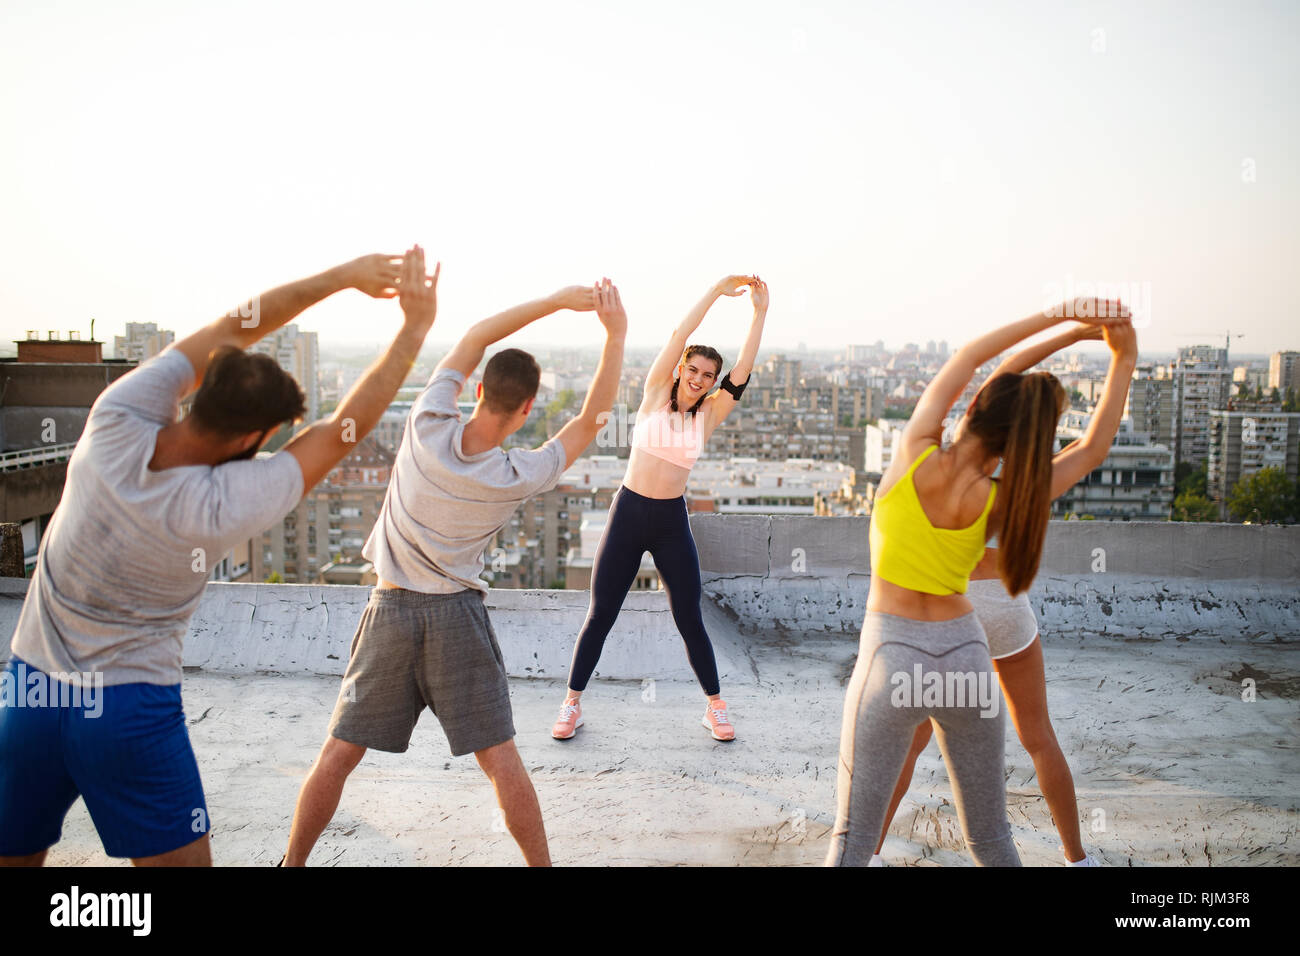 Fitness, sport, friendship and healthy lifestyle concept . Group of happy people exercising Stock Photo